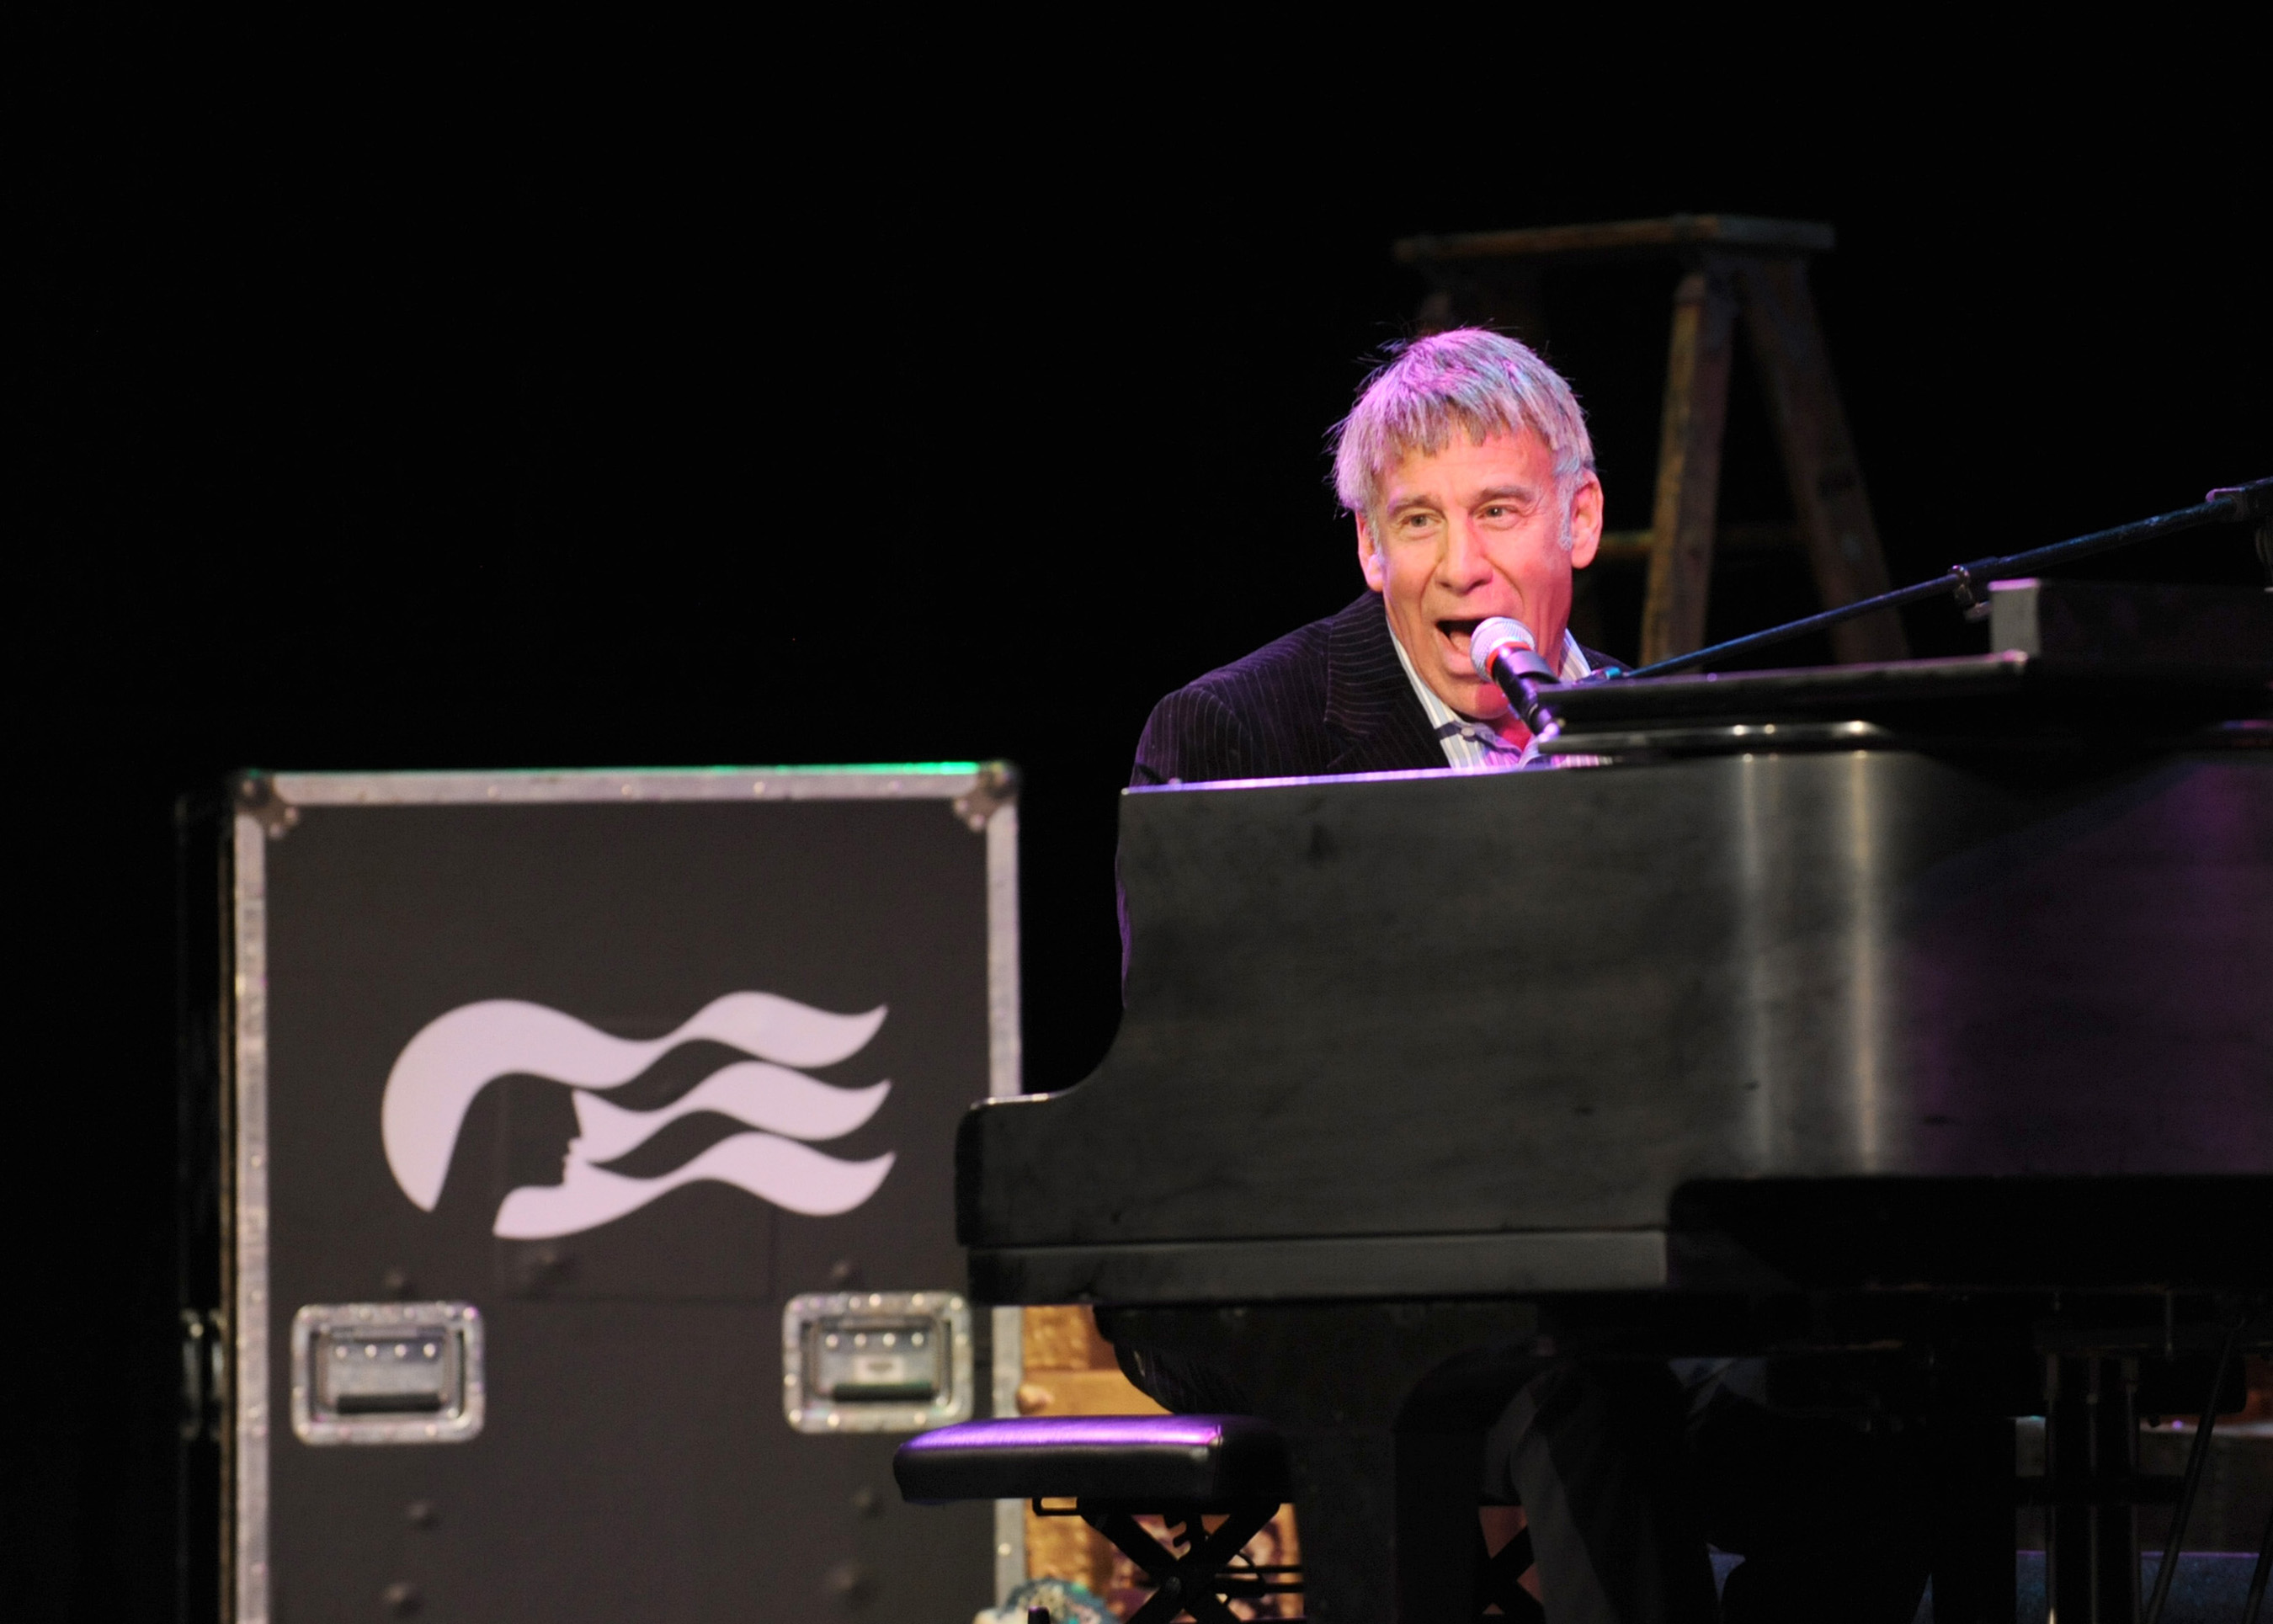 Princess Cruises raised the curtain on a new musical revue titled Magic to Do, from the Oscar, Grammy and Tony award-winning composer of Wicked, Pippin and Godspell Stephen Schwartz. 